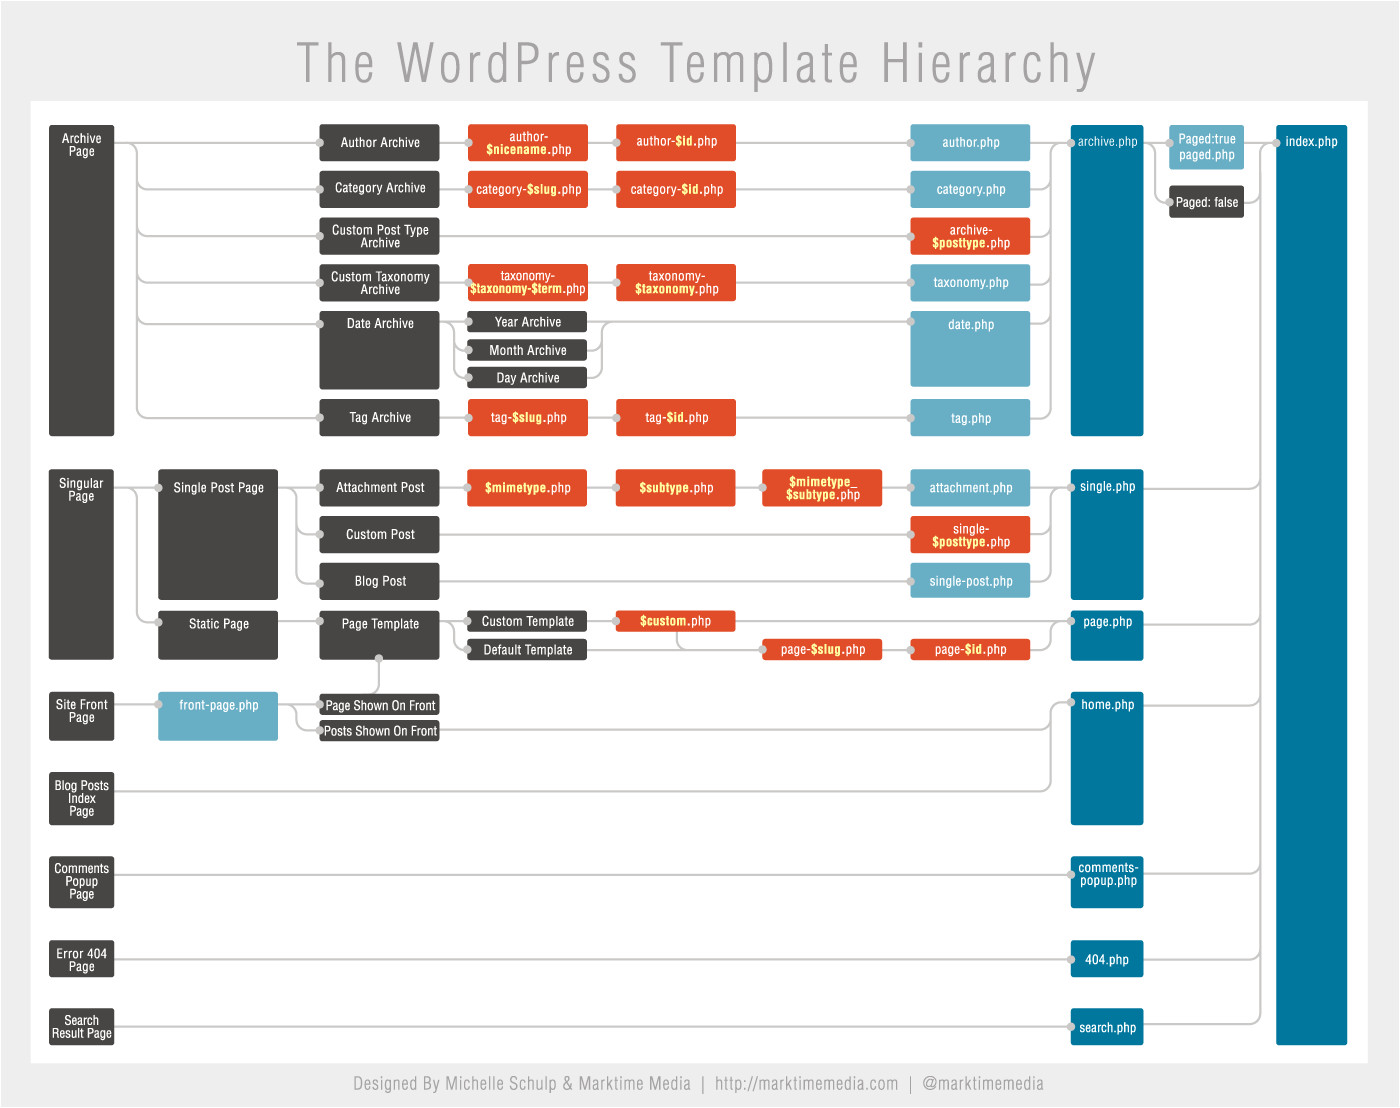 navigating the template hierarchy